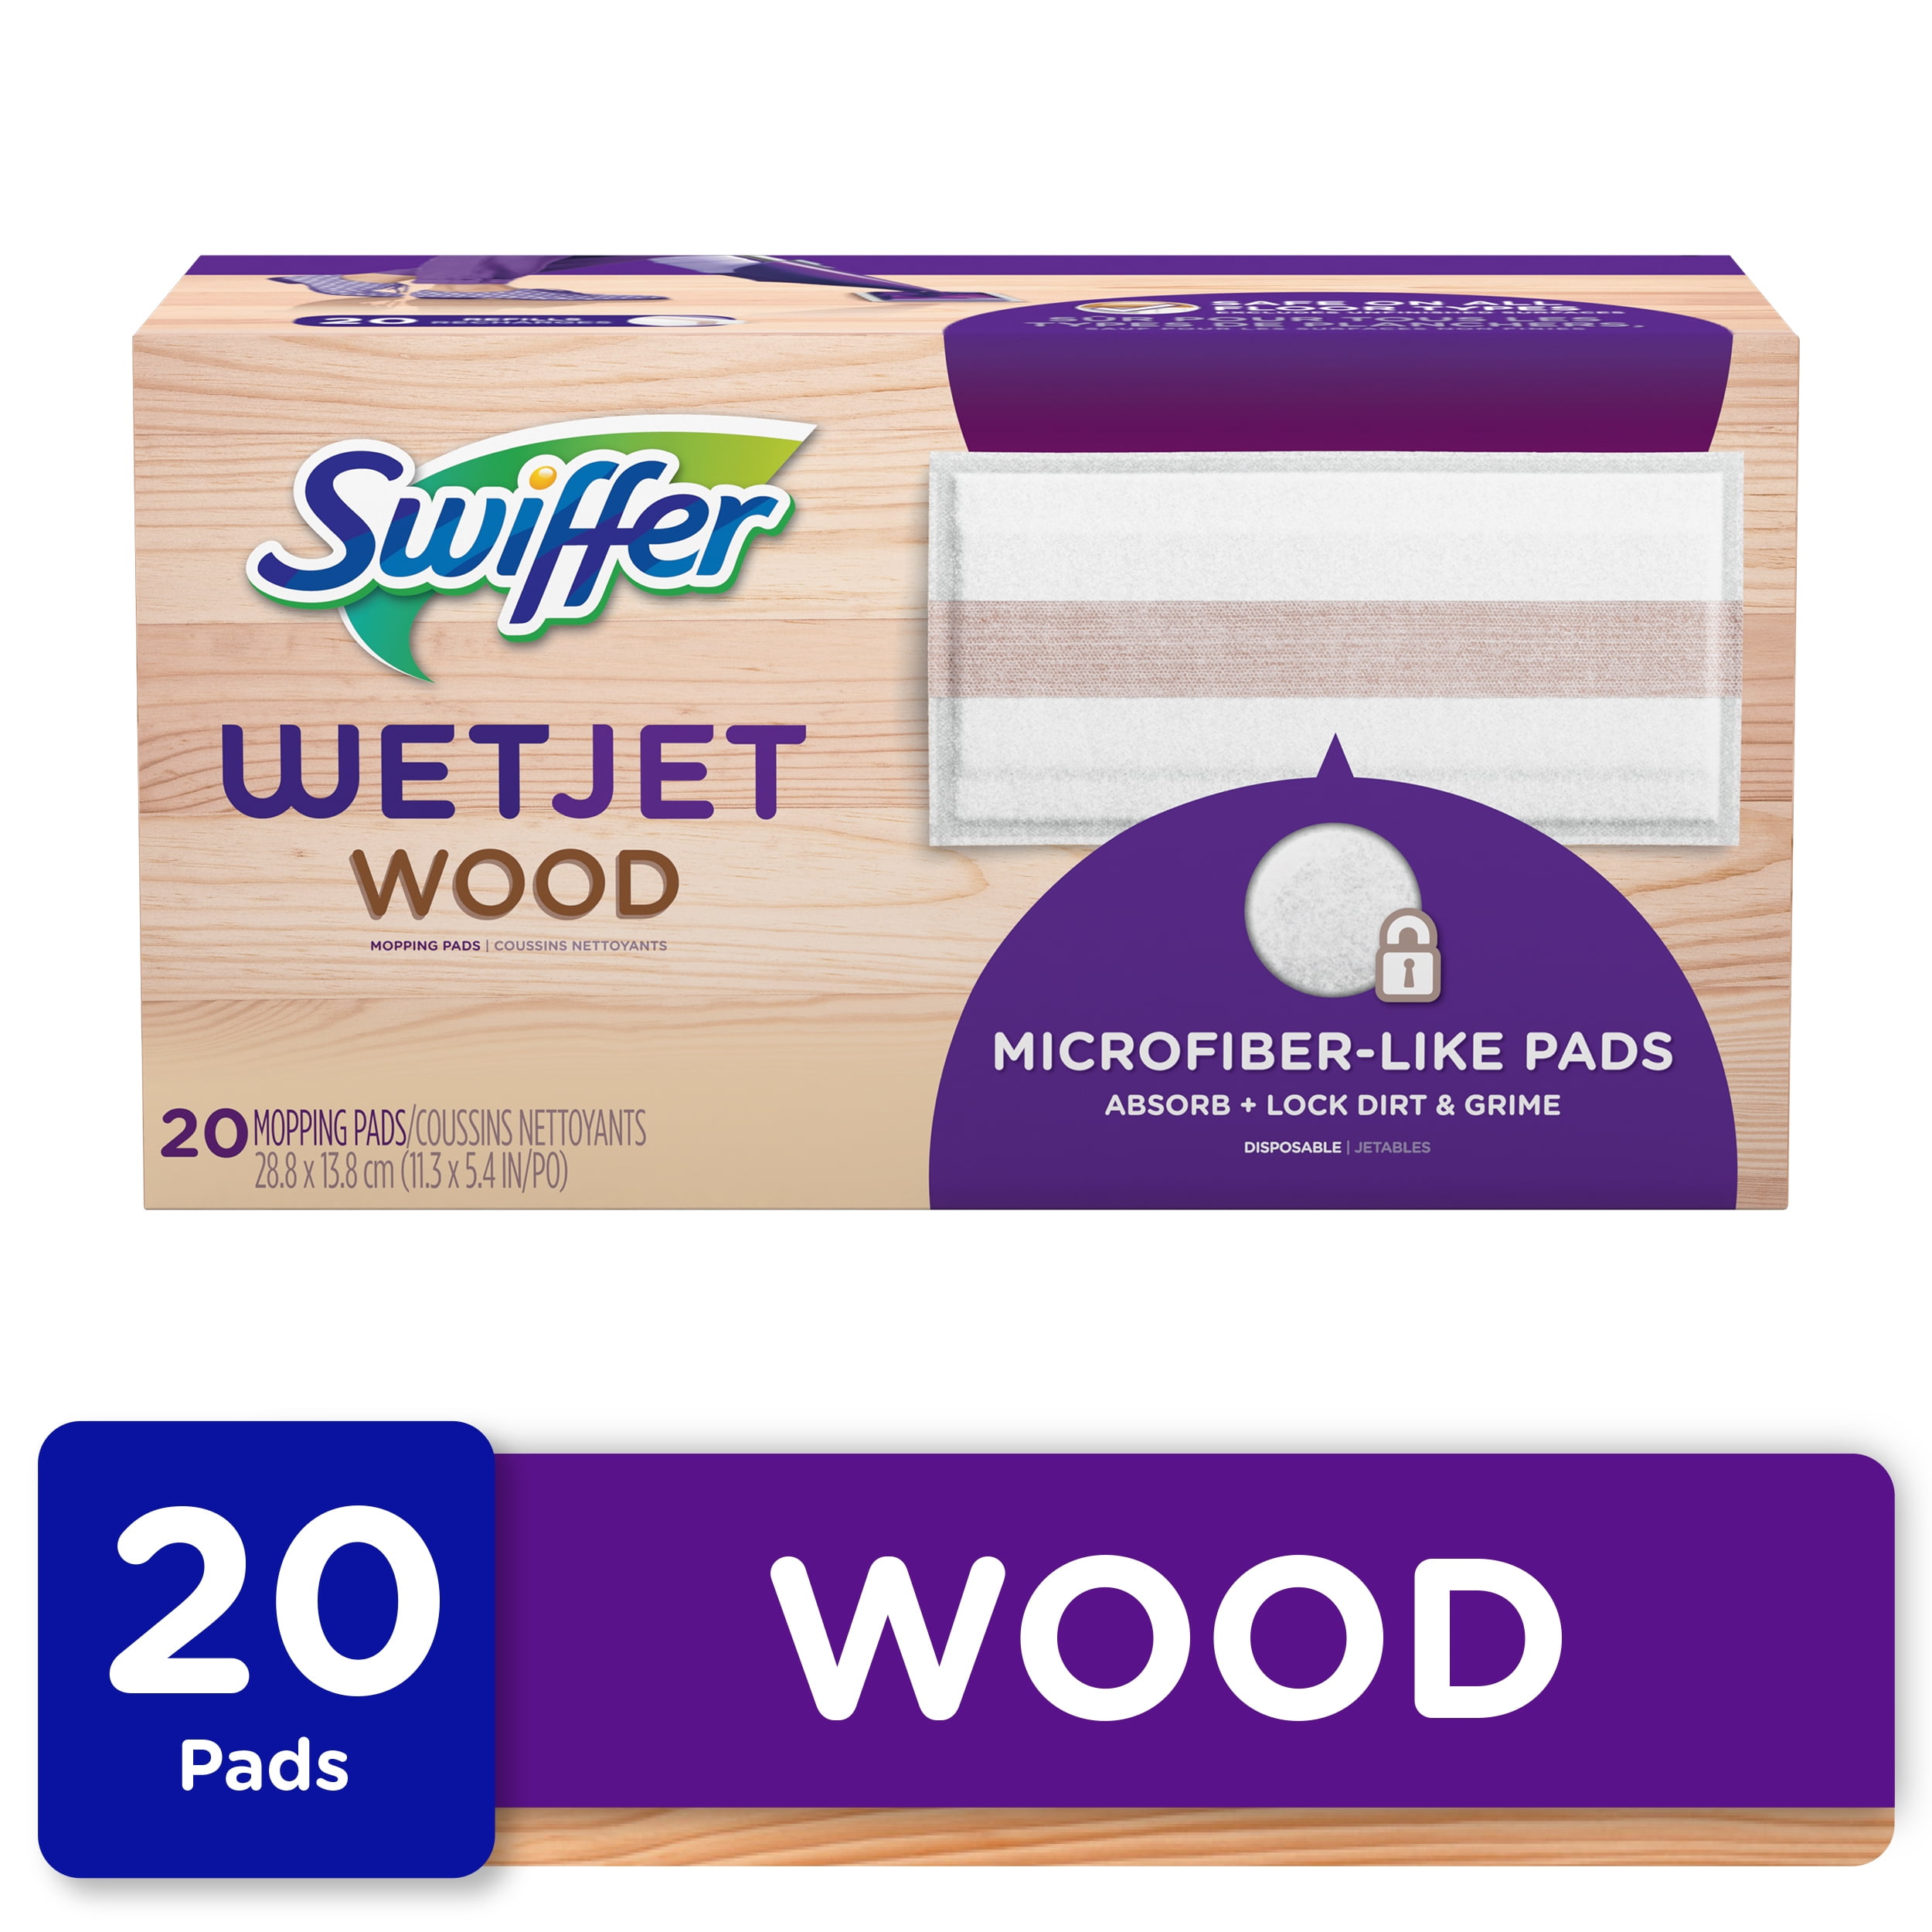 Swiffer WetJet Wood Mopping Refill Pads, 20 count